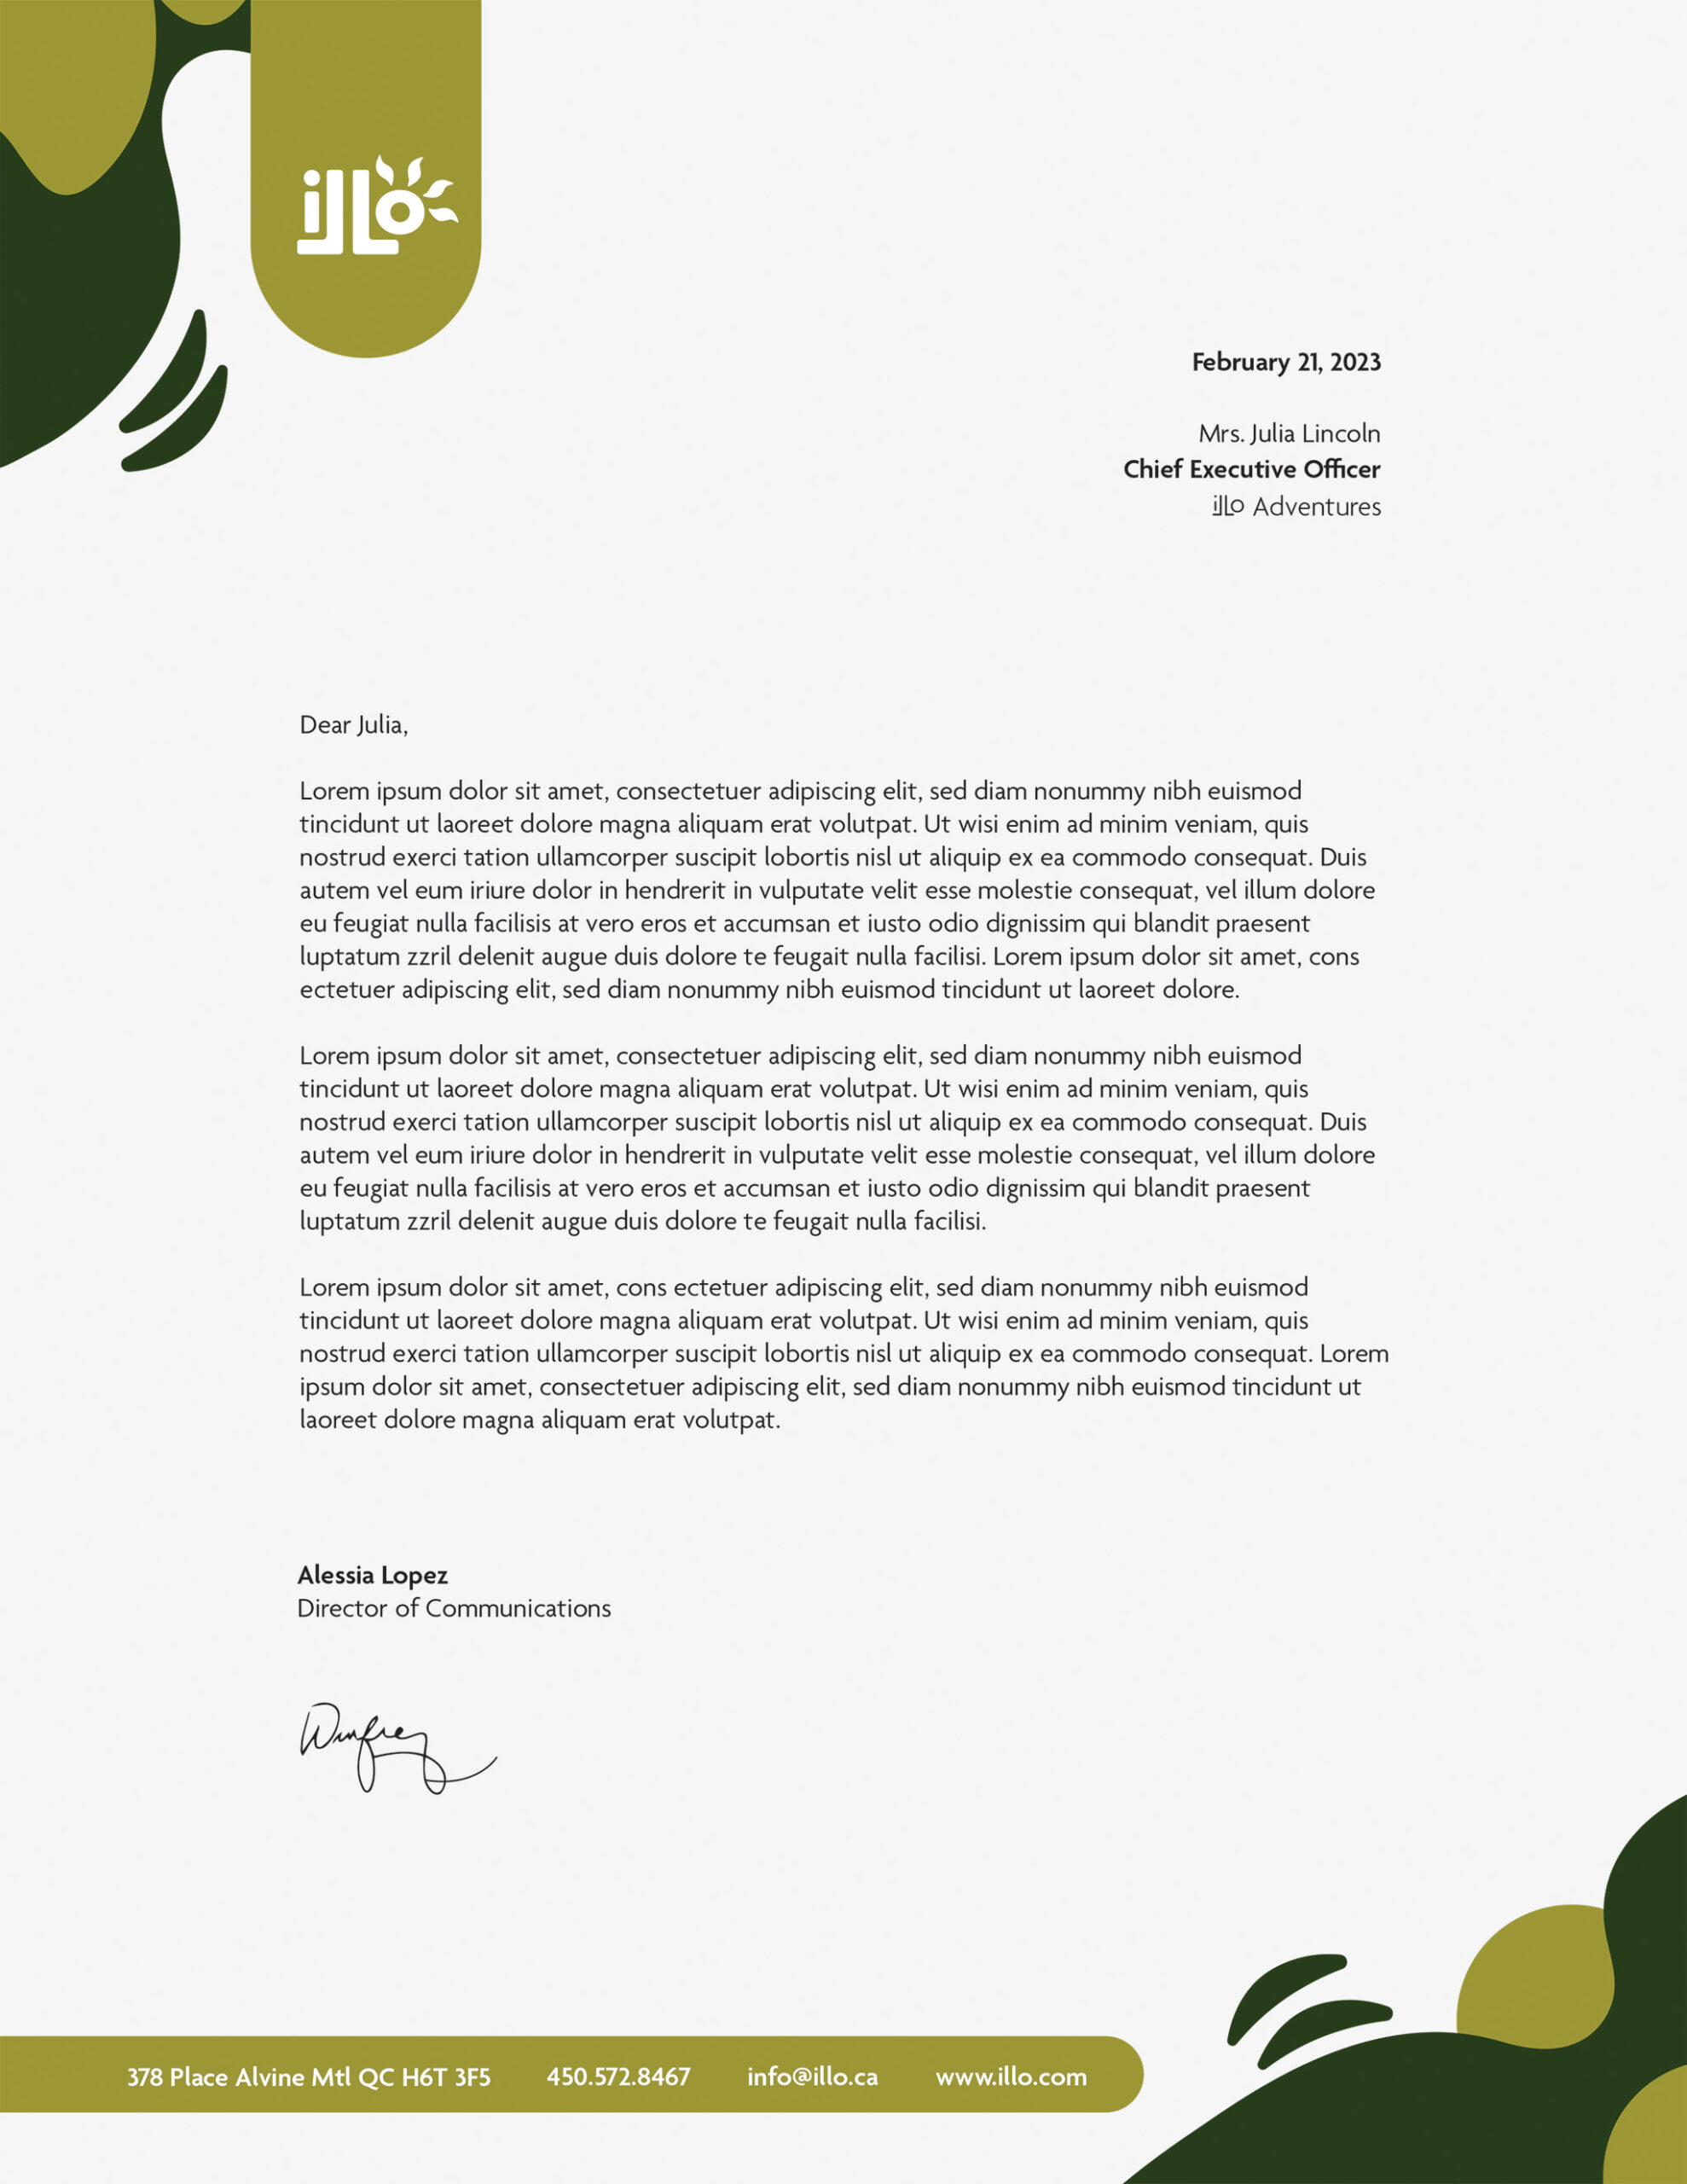 Professional stationary letterheads for the imagined travel agency Illo Adventures. This version features green organic shapes and elements to support the text and make it unique to the brand. 